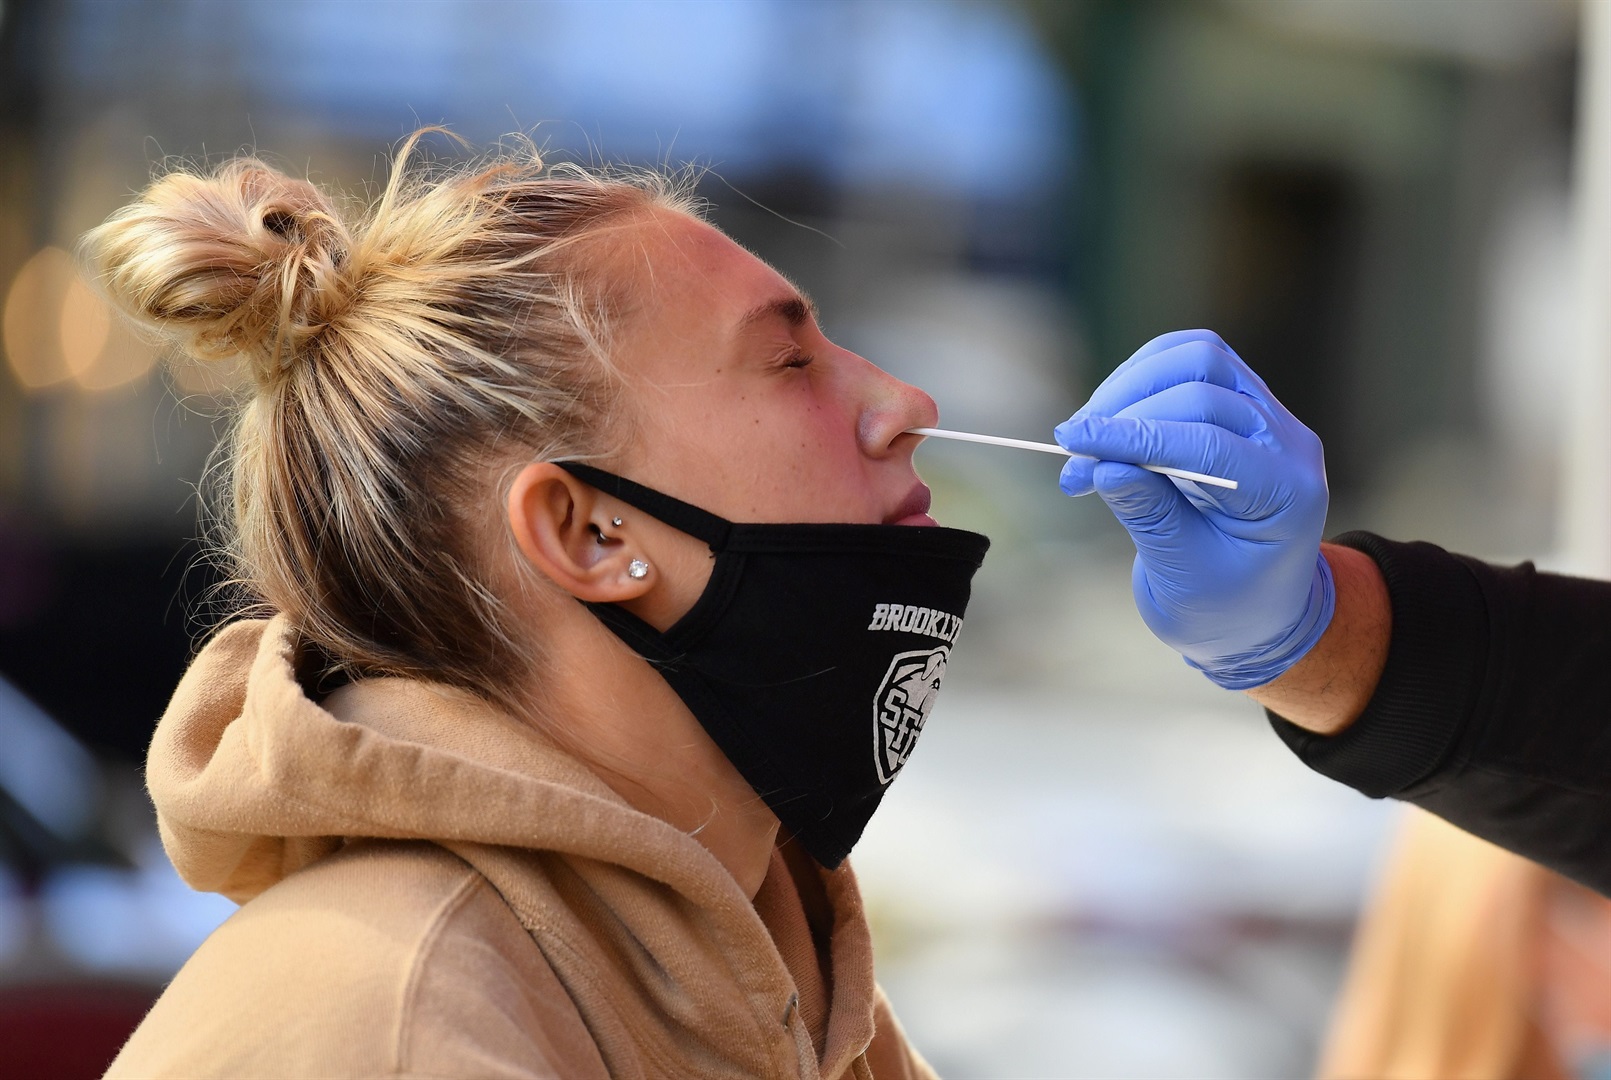 A medical worker tests a student for COVID-19 at a pop-up testing site in New York City on October 8, 2020.
